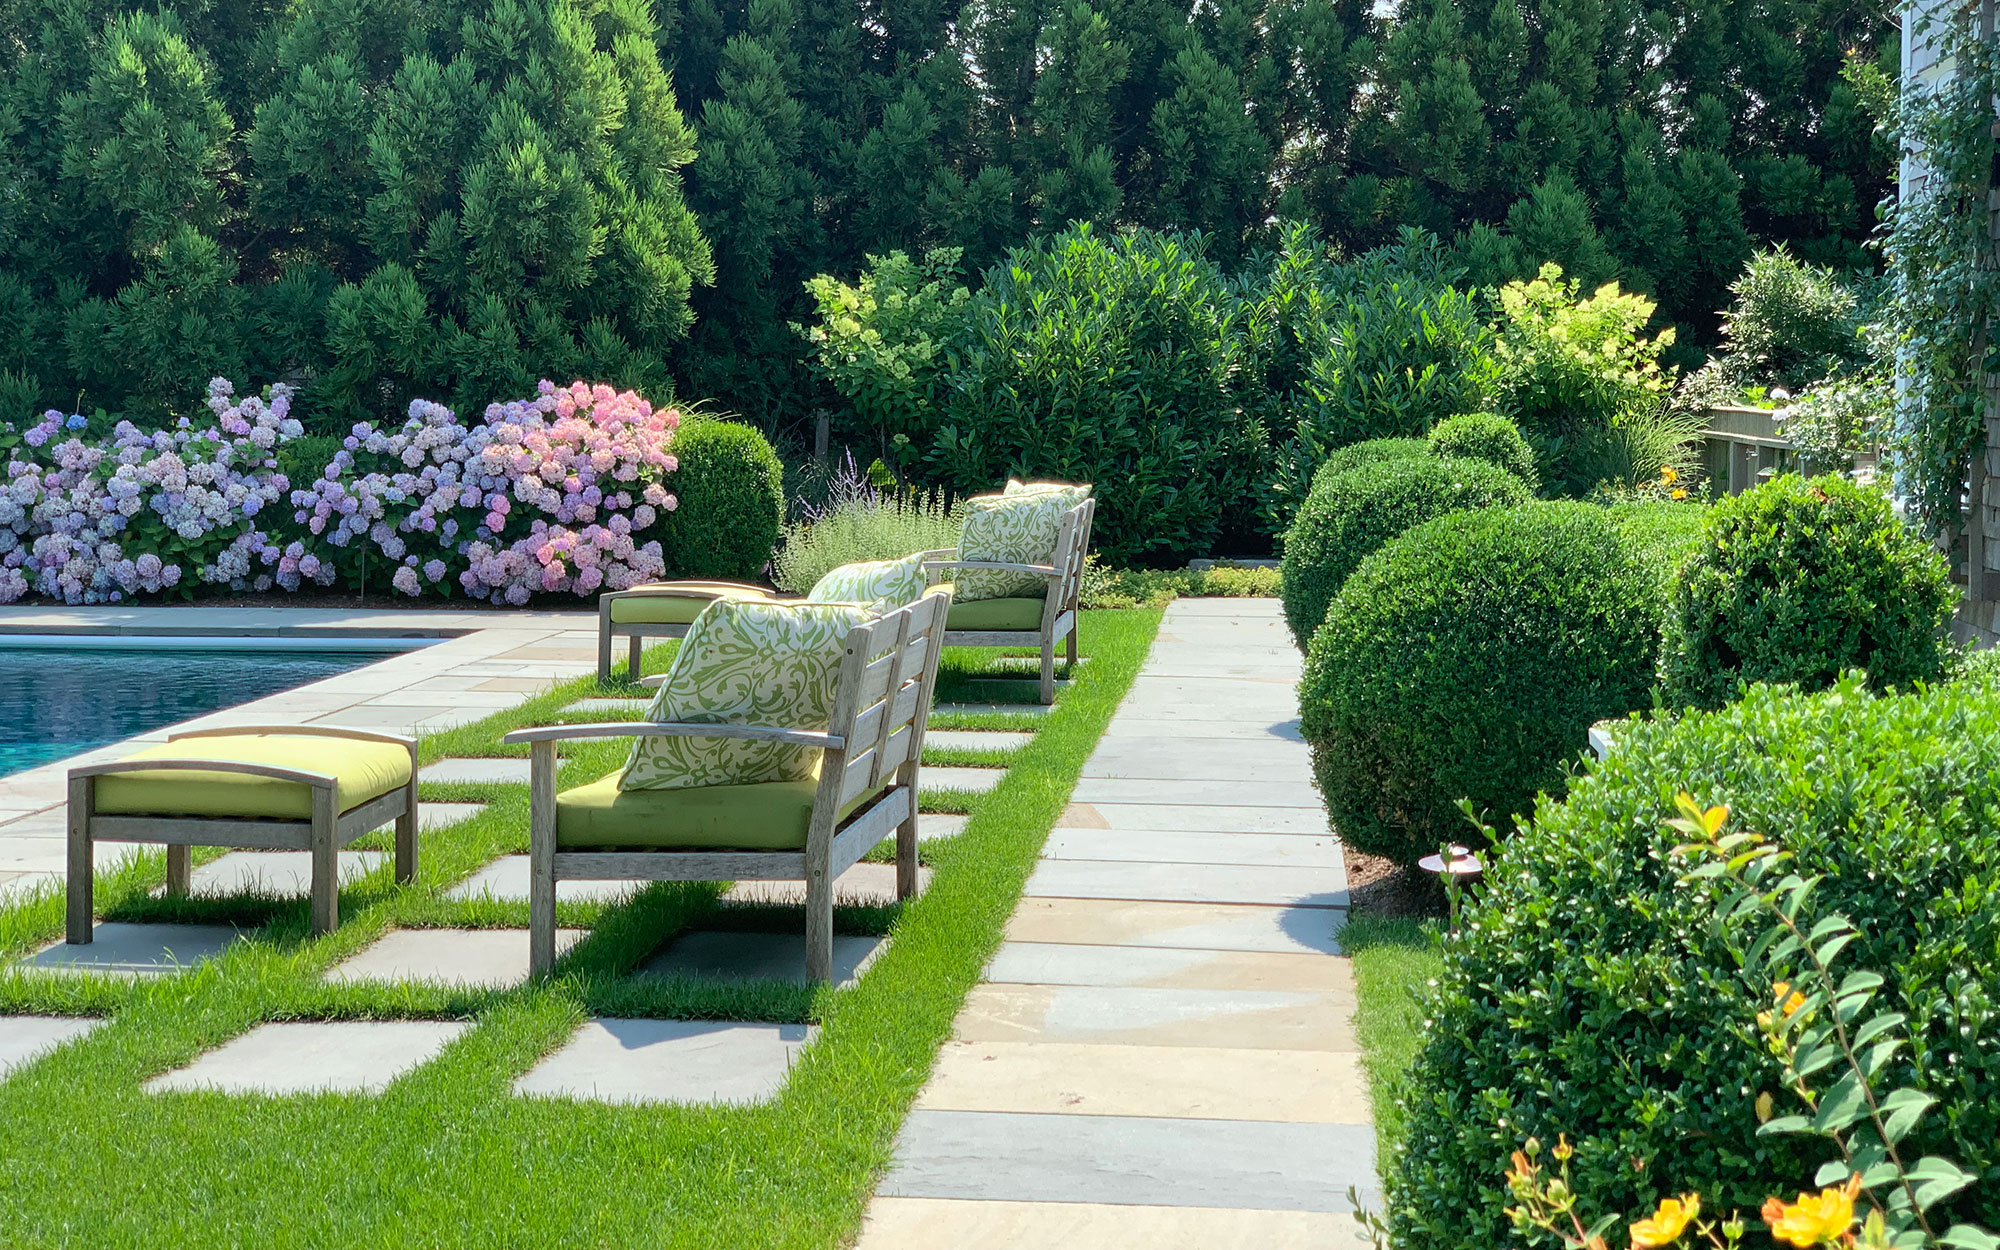 Nantucket Landscaping Services by Atlantic Landscaping, Inc. Since 1999